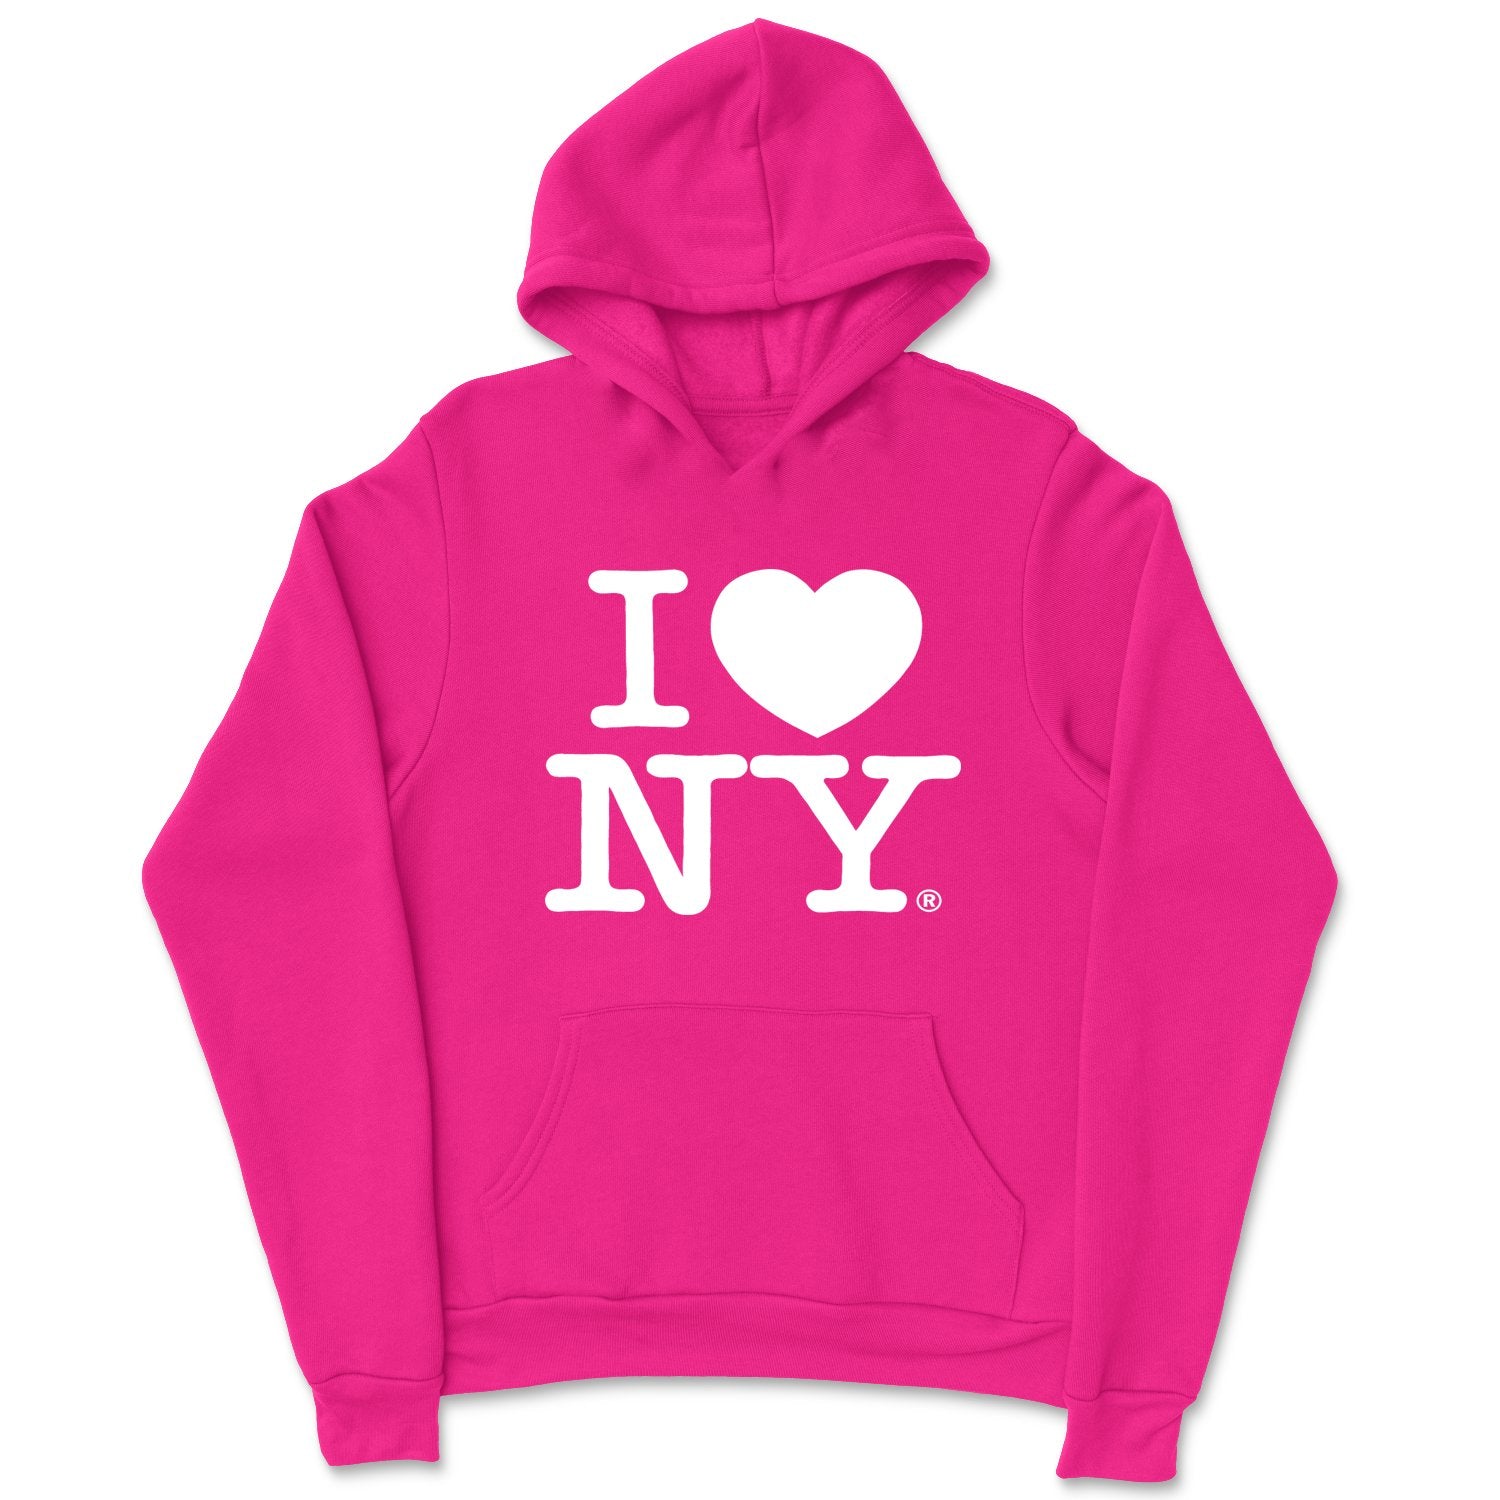 I Love NY Kids Hoodie Sweatshirt Officially Licensed (Youth, Hot Pink)